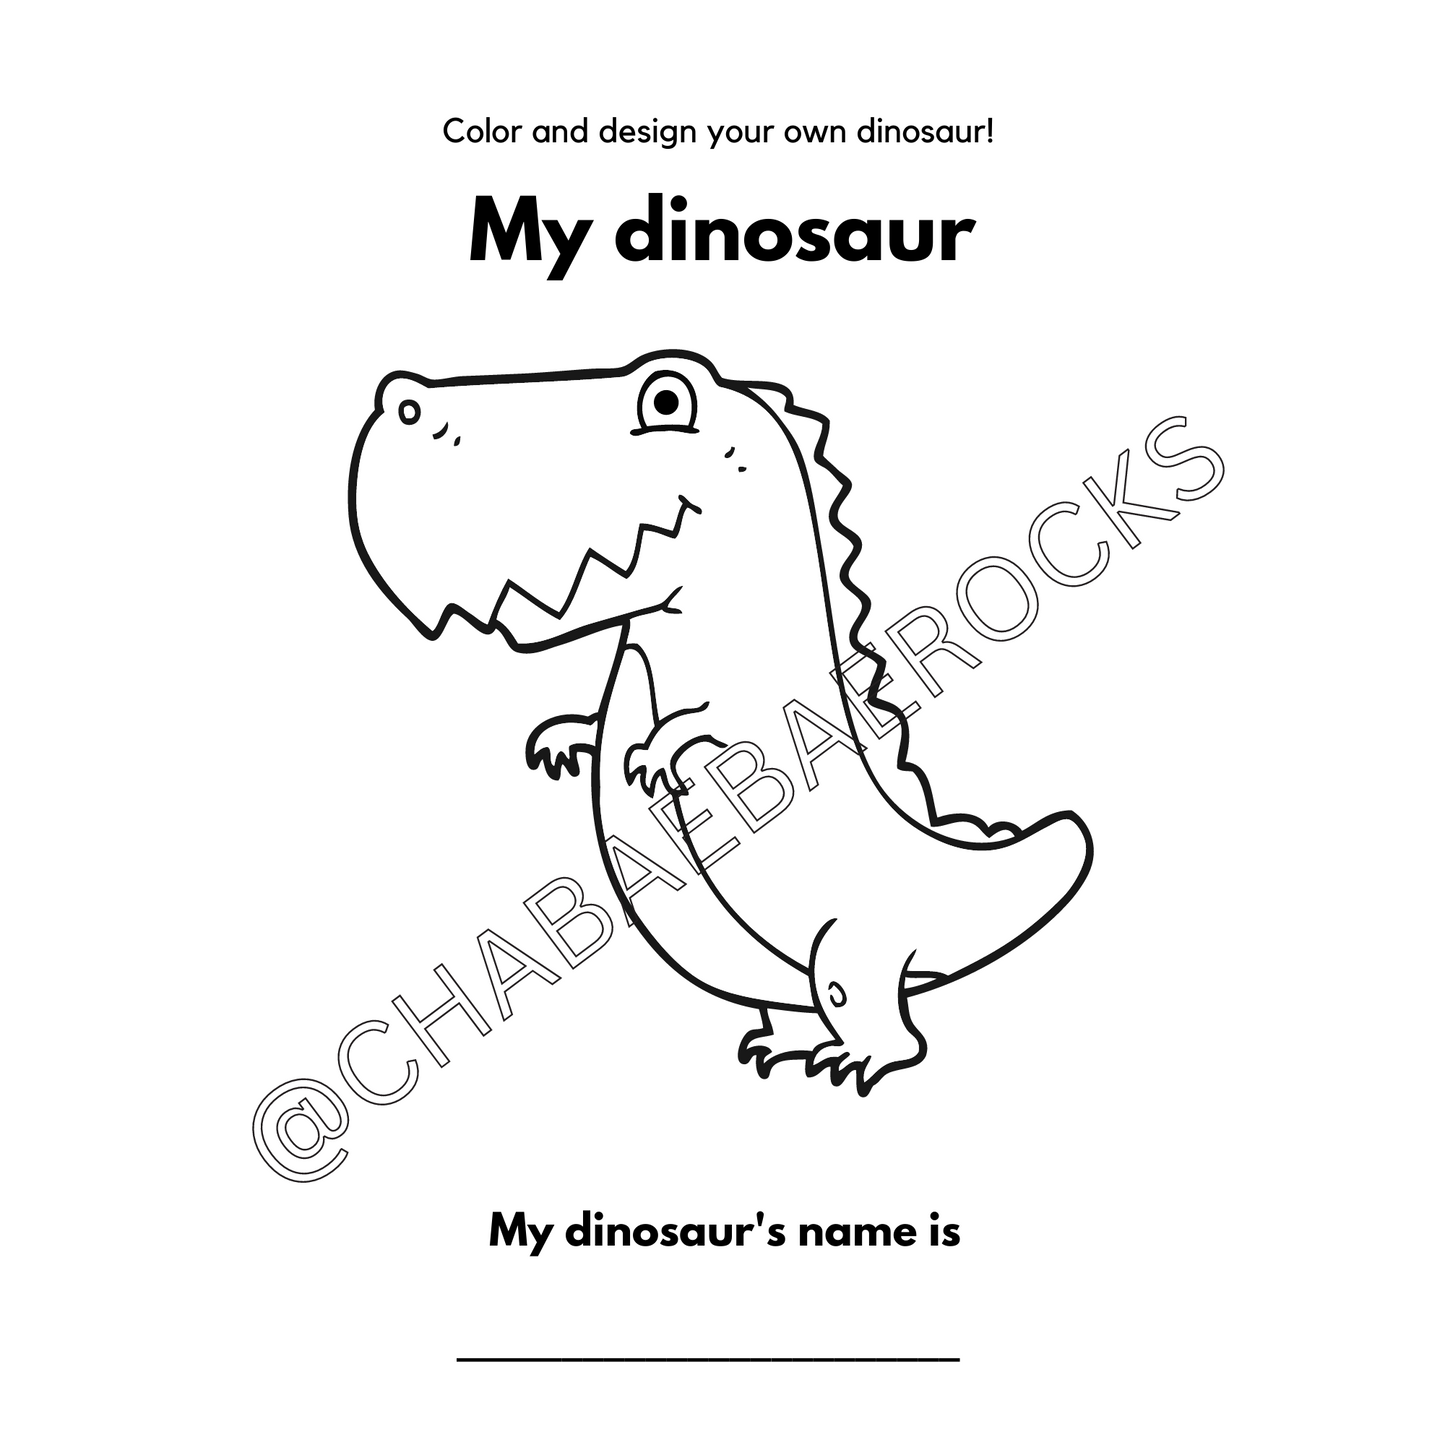 Design Your Own Dinosaur Coloring Pages, Printable